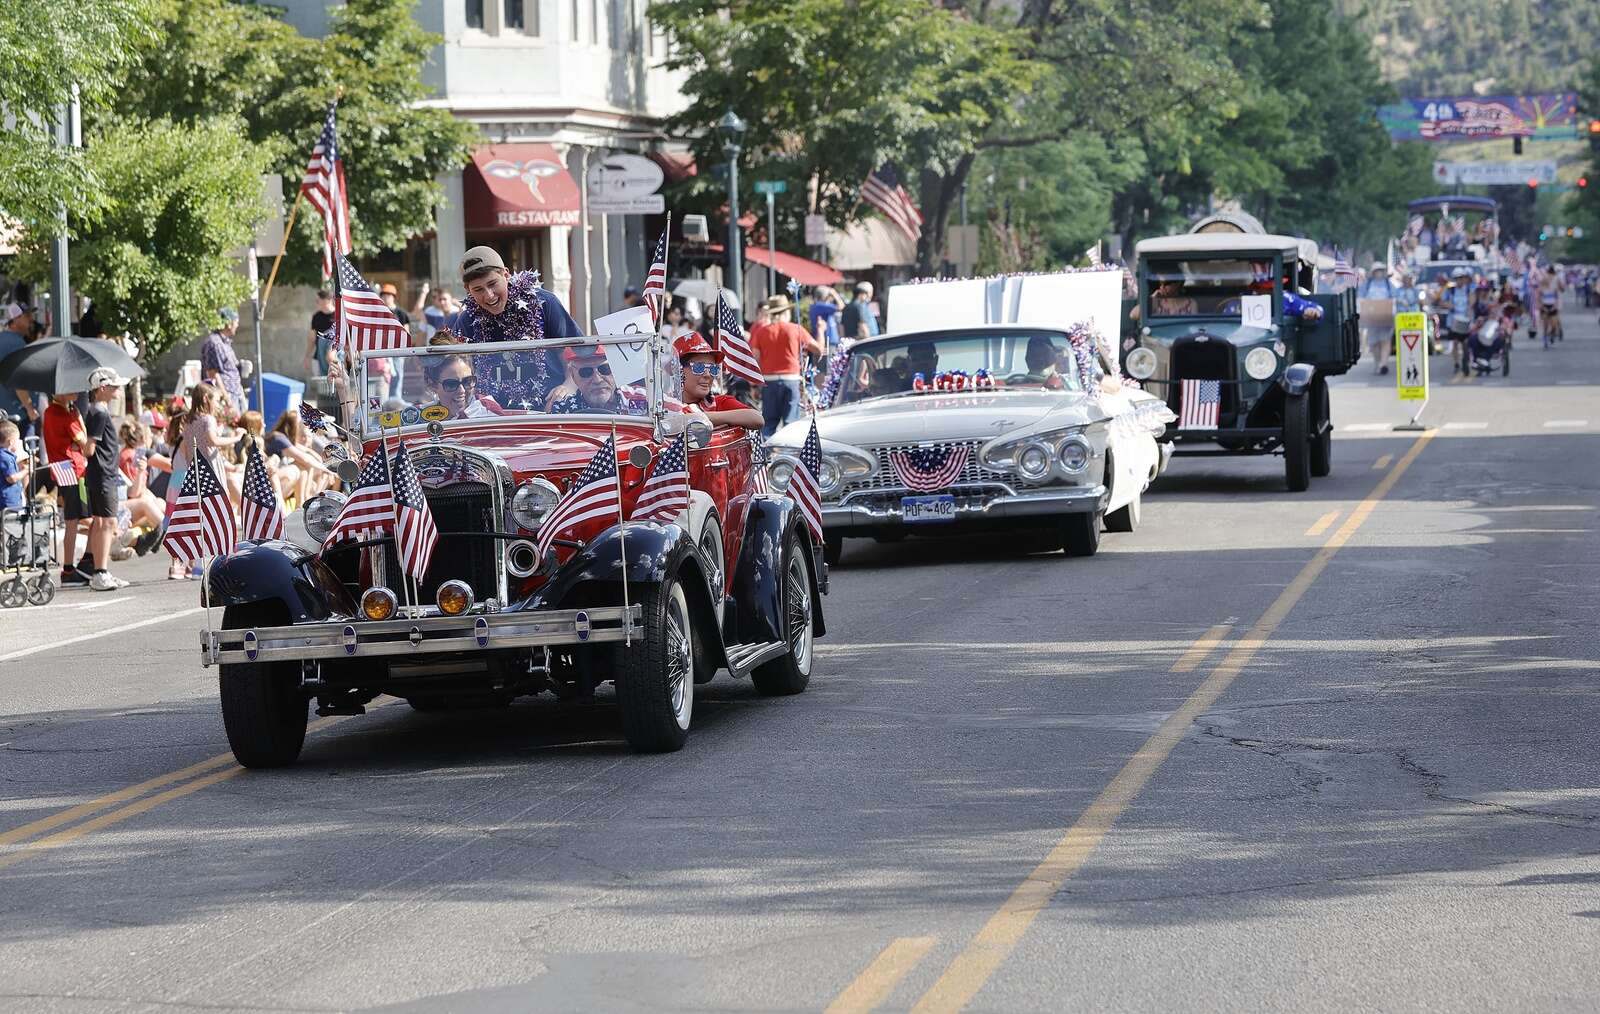 Photos A colorful Fourth of July parade in downtown Durango The